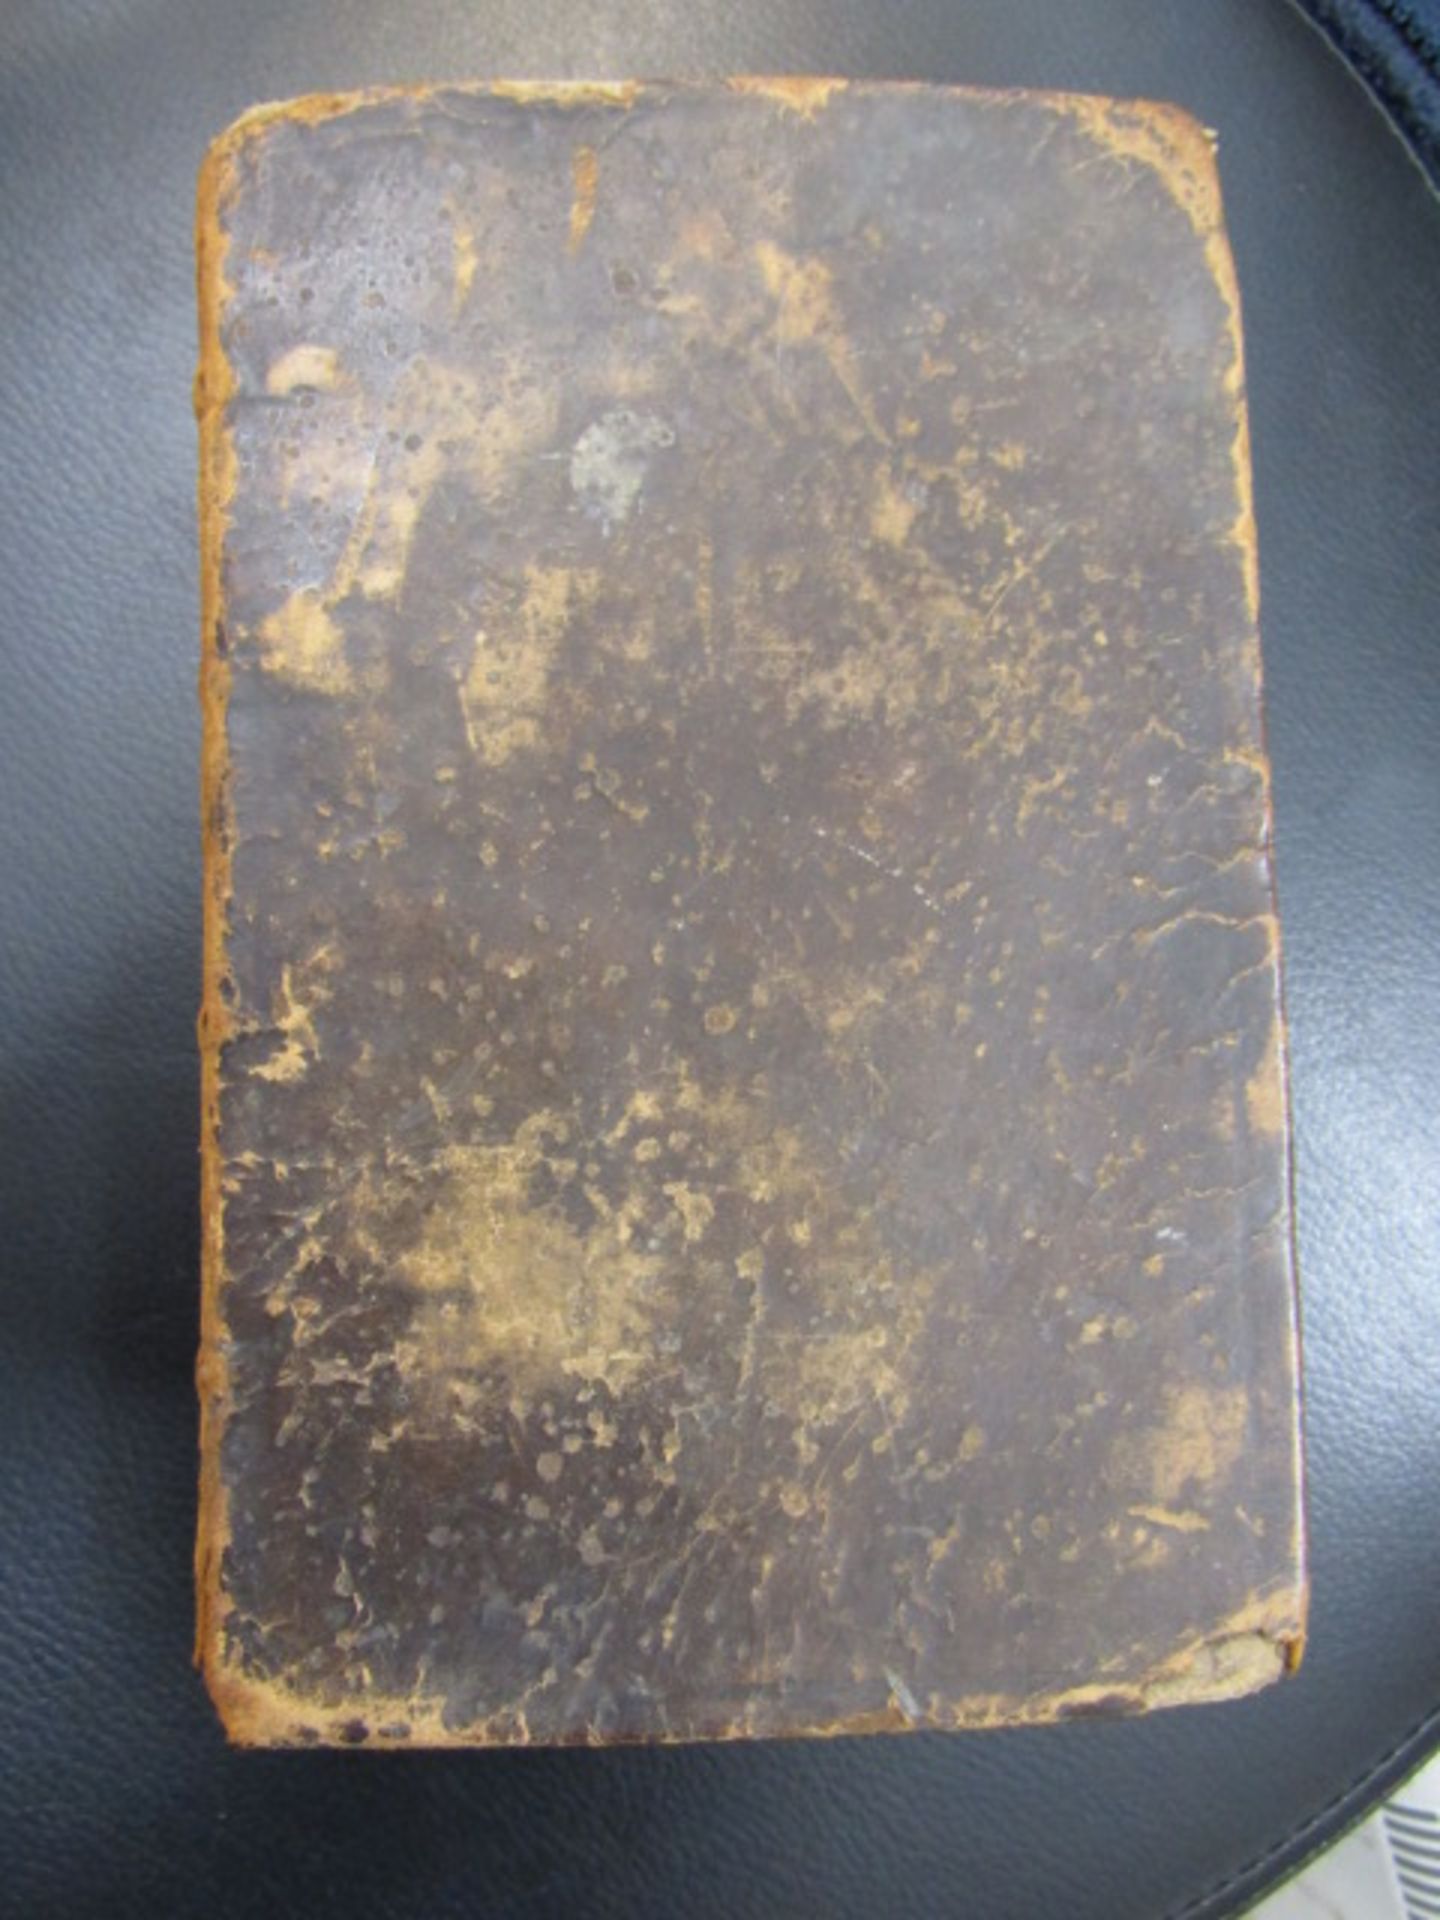 William Sherlock practical Difcourle concerning death 5th edition, London W Rogers 1691 Full